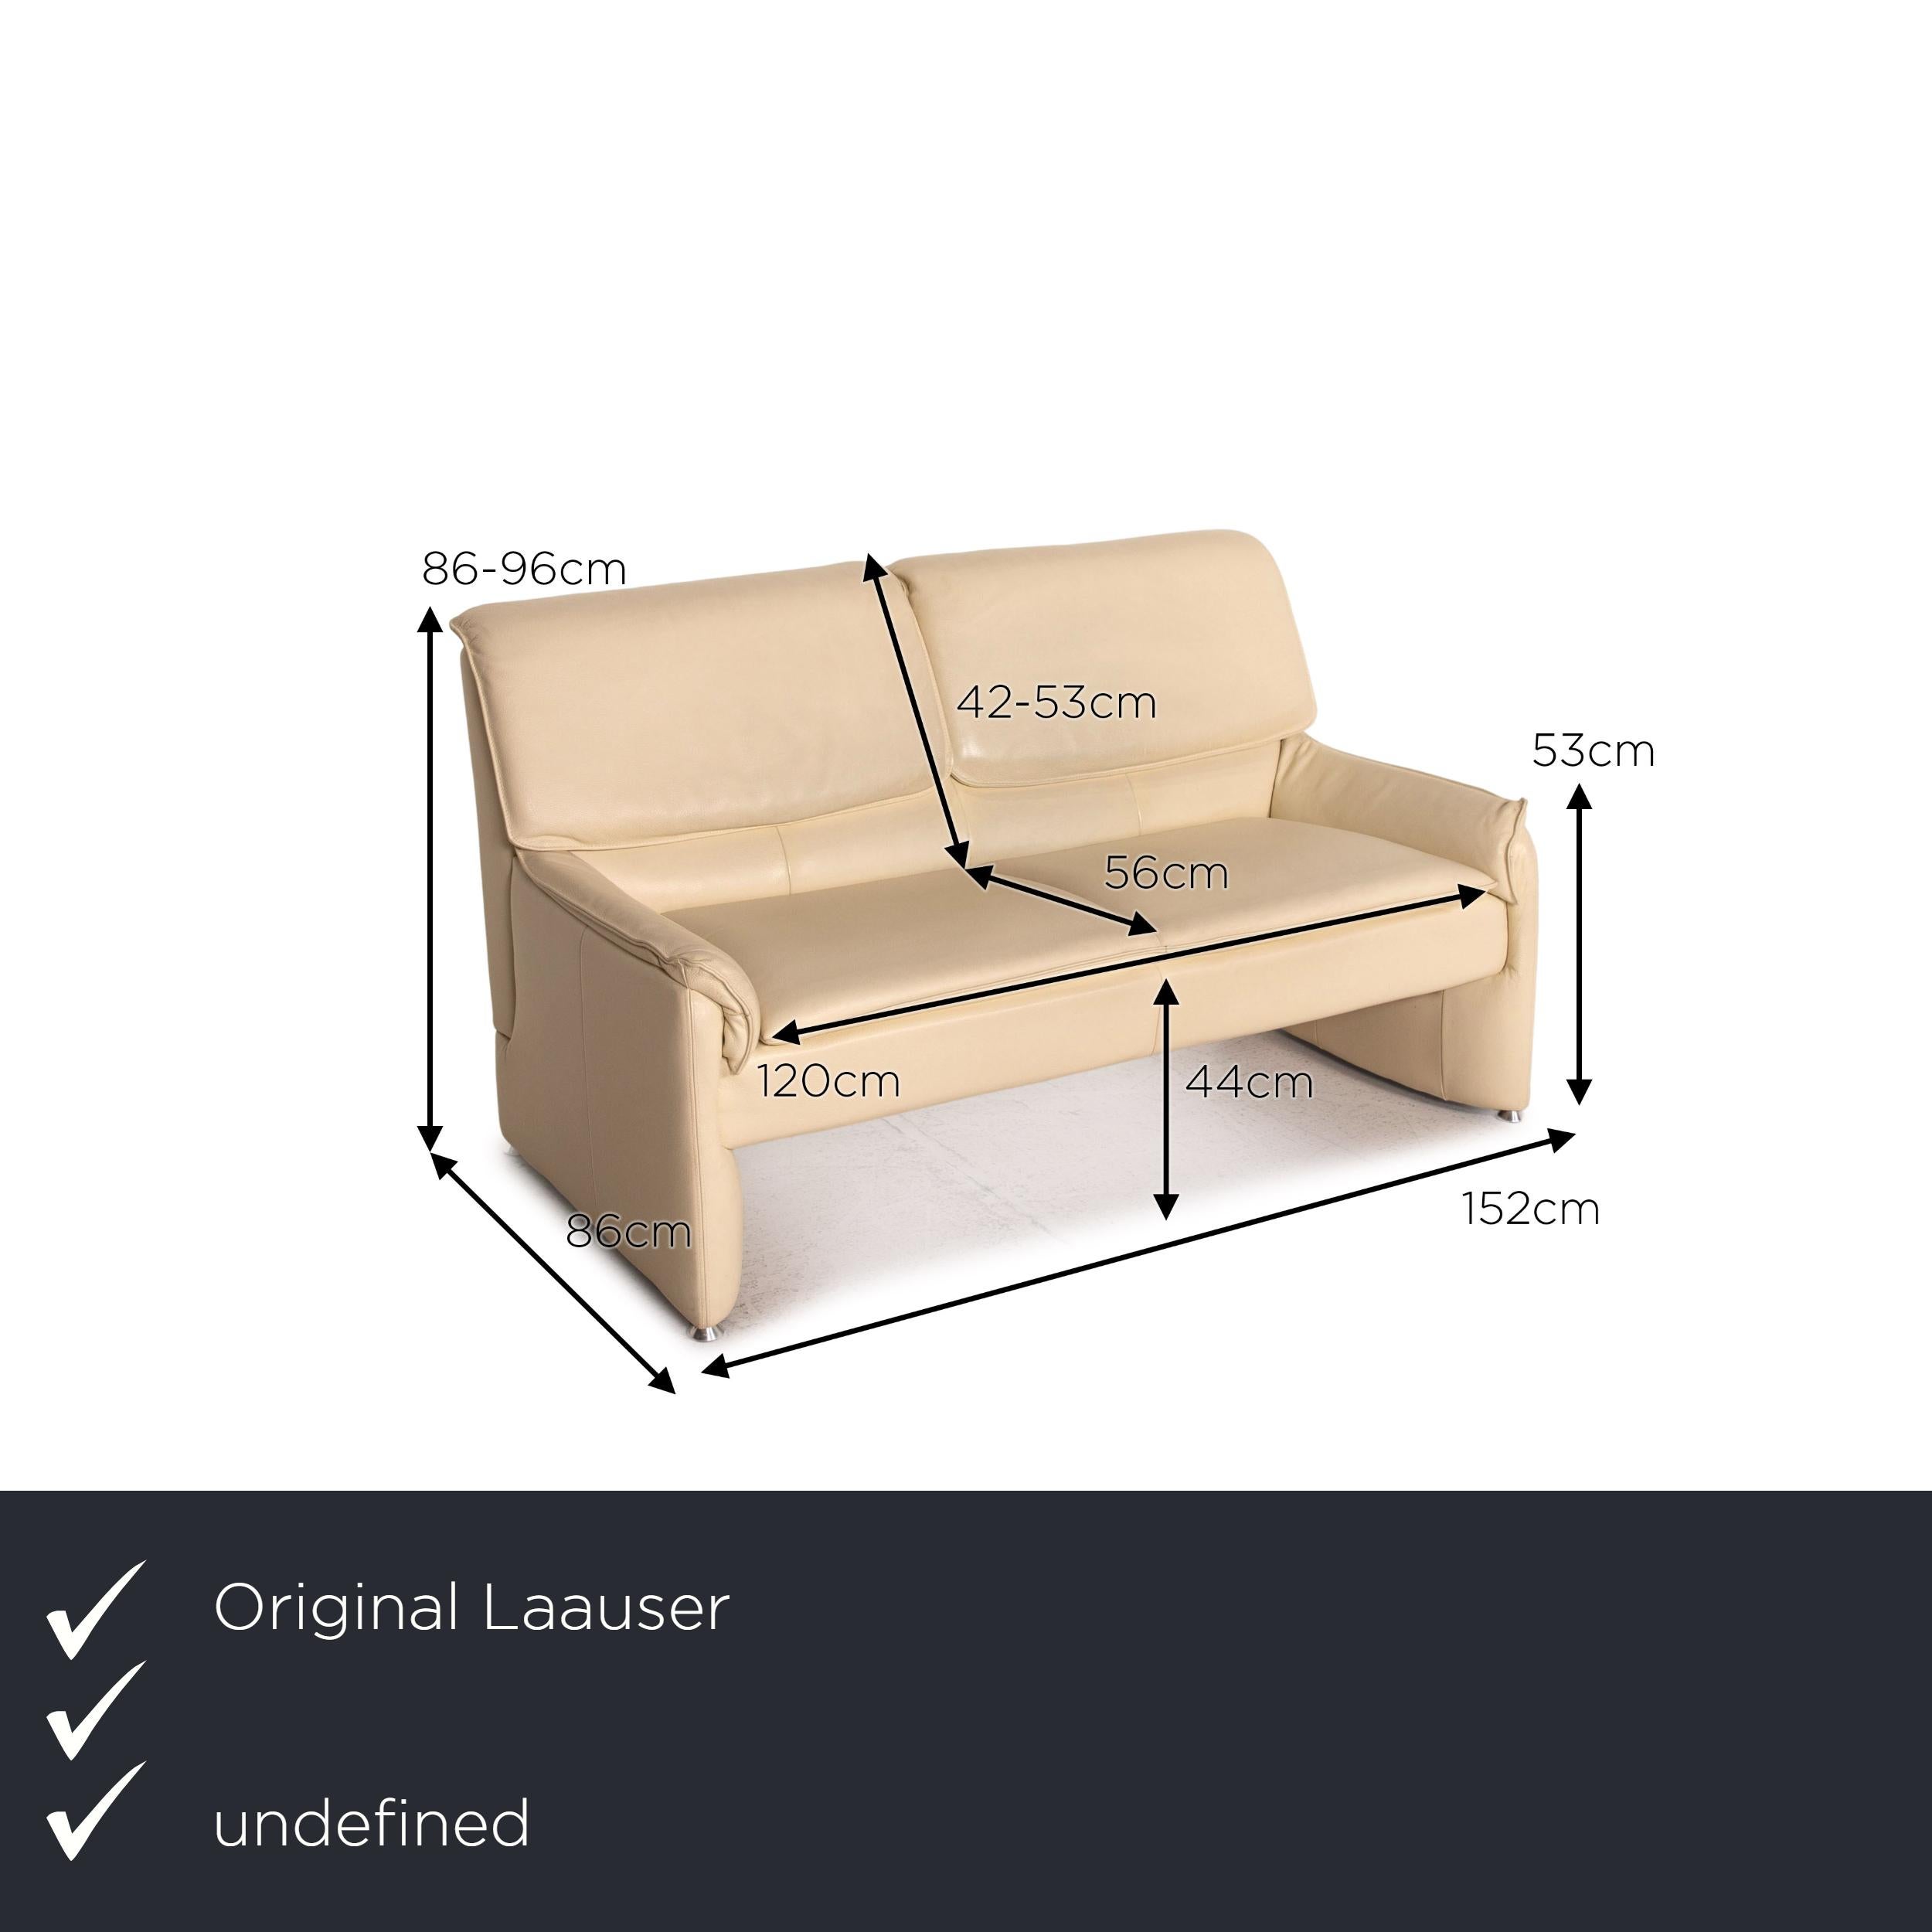 We present to you a Laauser leather sofa set cream 1x two-seater 1x armchair.


 Product measurements in centimeters:
 

Depth: 86
Width: 152
Height: 86
Seat height: 44
Rest height: 53
Seat depth: 56
Seat width: 120
Back height: 42.
 